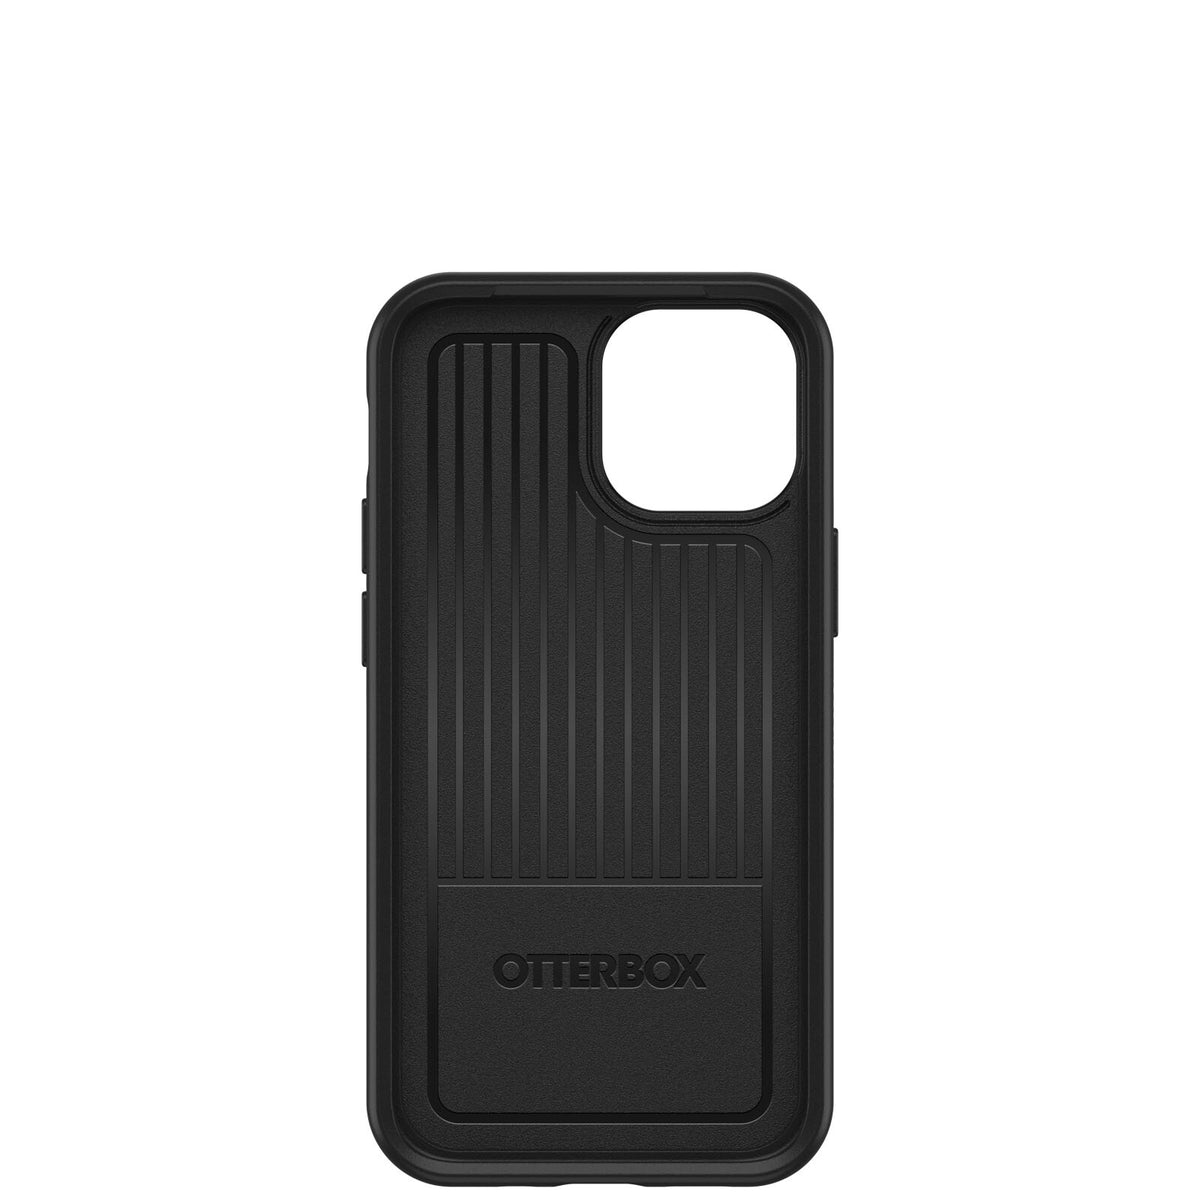 OtterBox Symmetry Series for iPhone 13 mini / 12 mini in Black - No Packaging